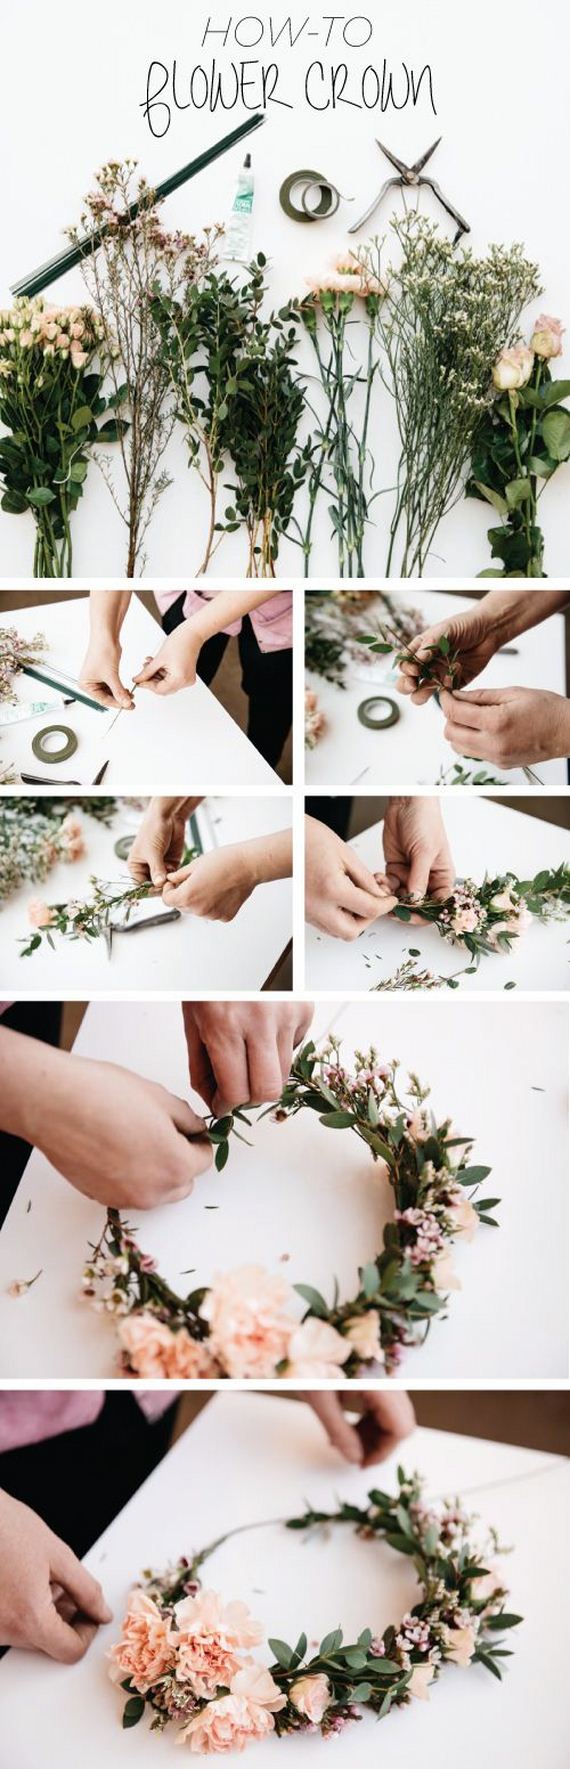 04-how-to-make-a-flower-crown-hairband-diy